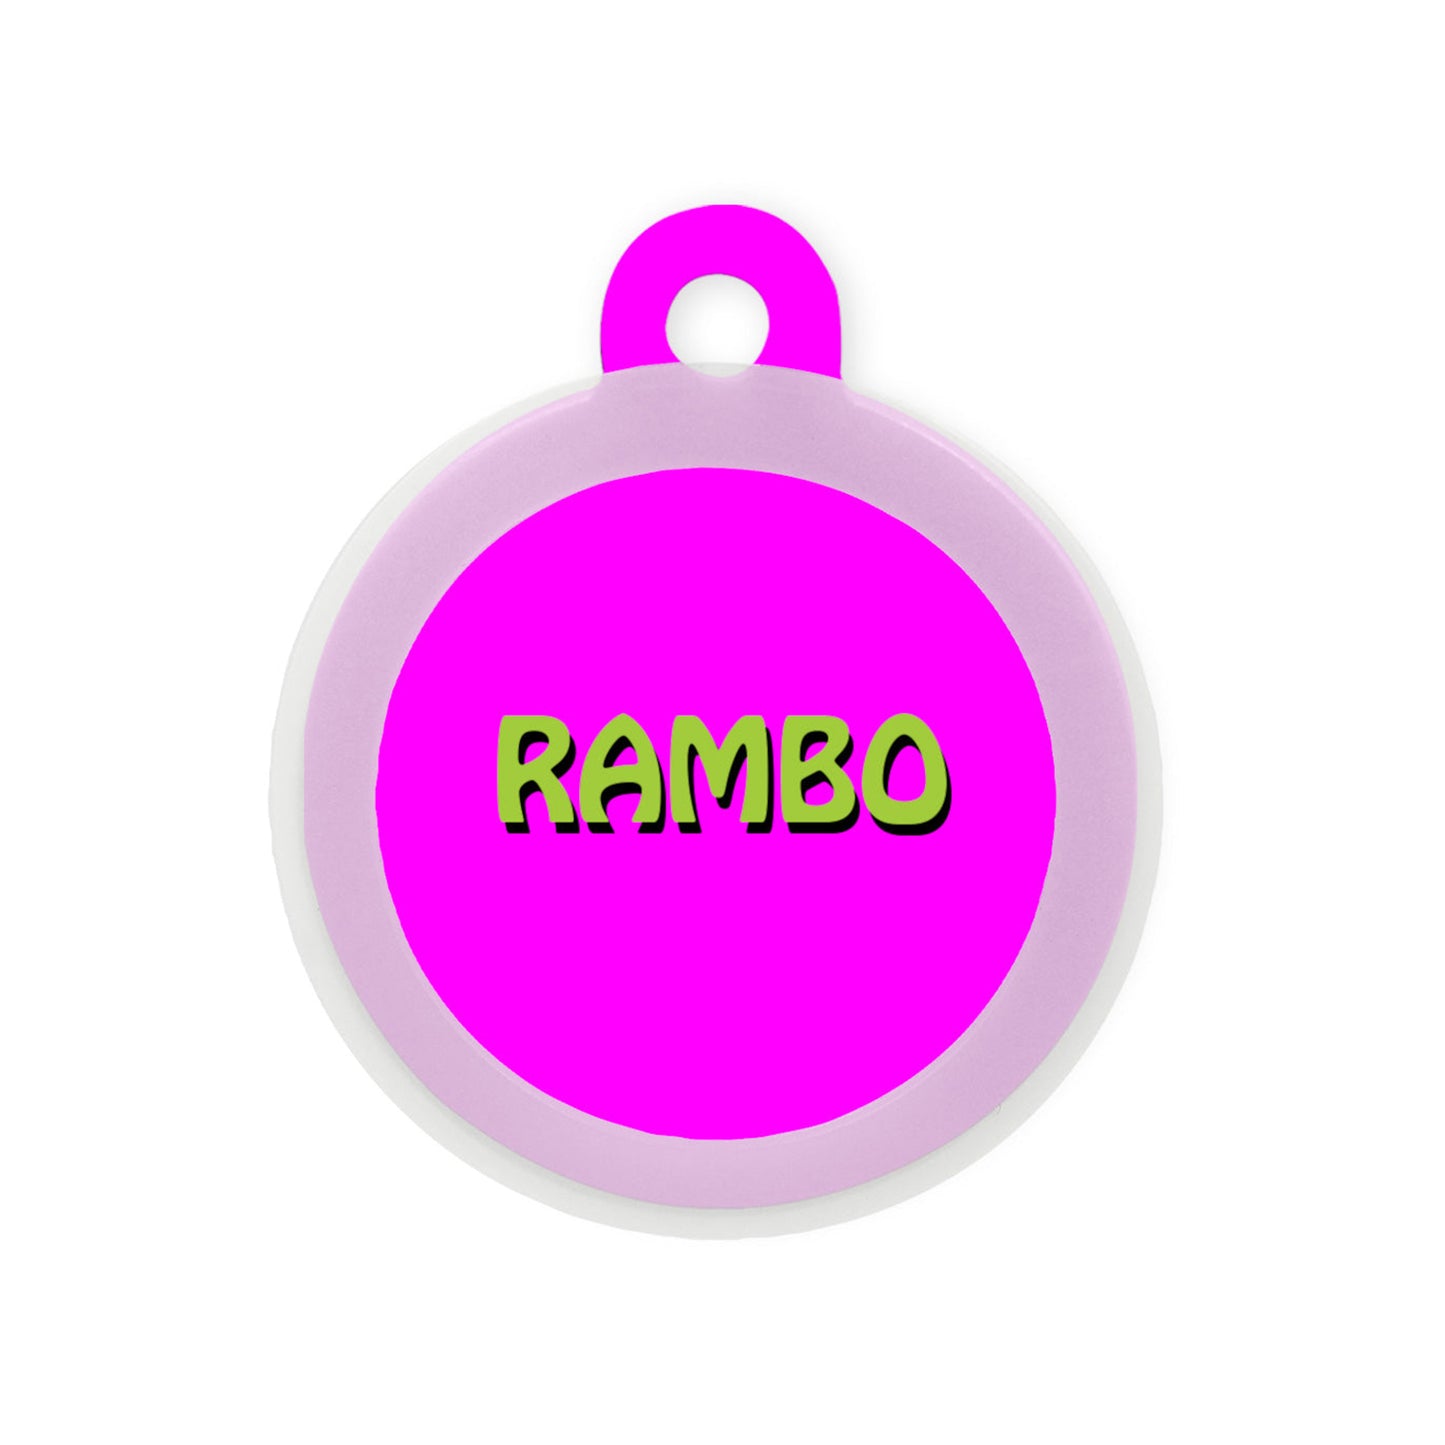 Taggie - Solid Neon Pink Pet ID Tag For Dogs & Cats